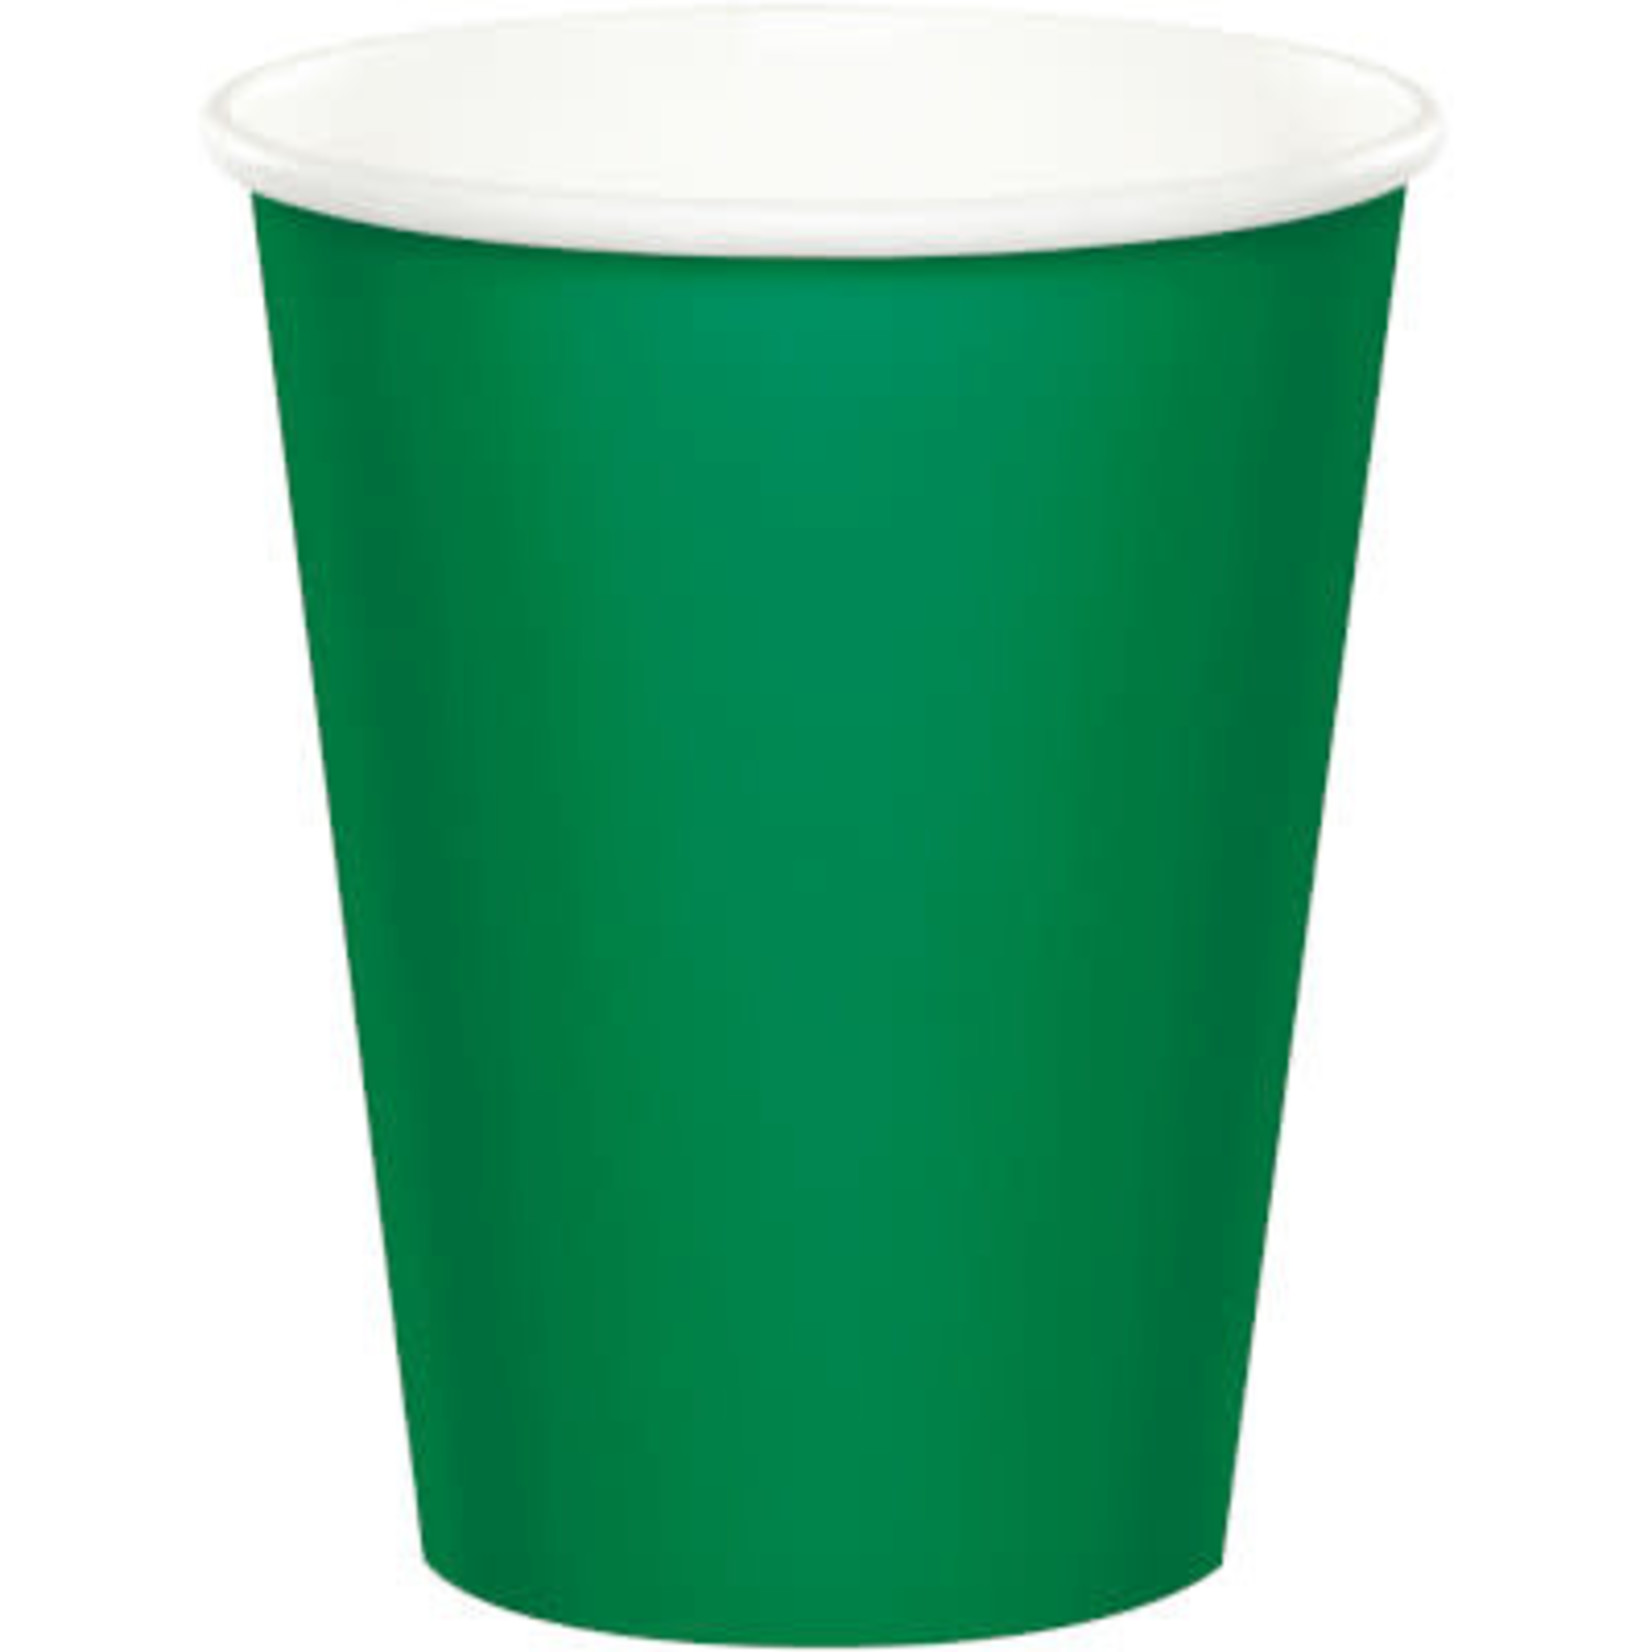 Touch of Color 9oz. Emerald Green Hot/Cold Paper Cups - 24ct.